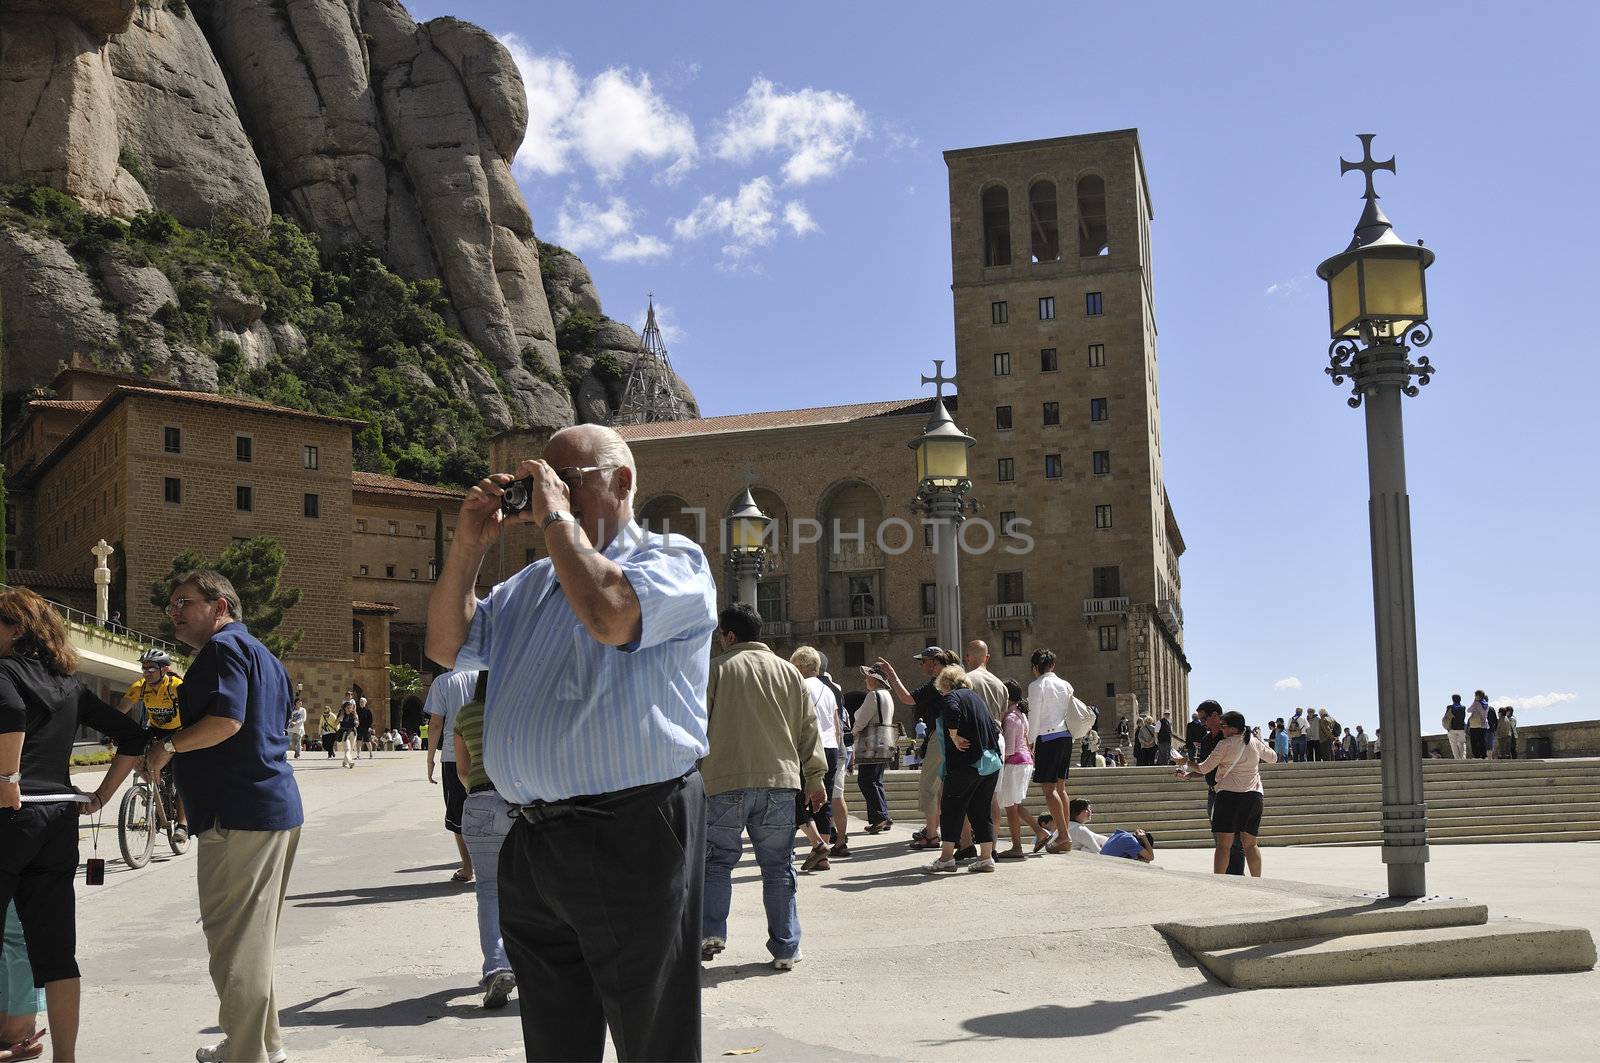 Barcelona, Spain - June 20, 2010 :  man takes photo among walking tourists at the place of famous Monserrat Monastery at Barcelona's vicinity.